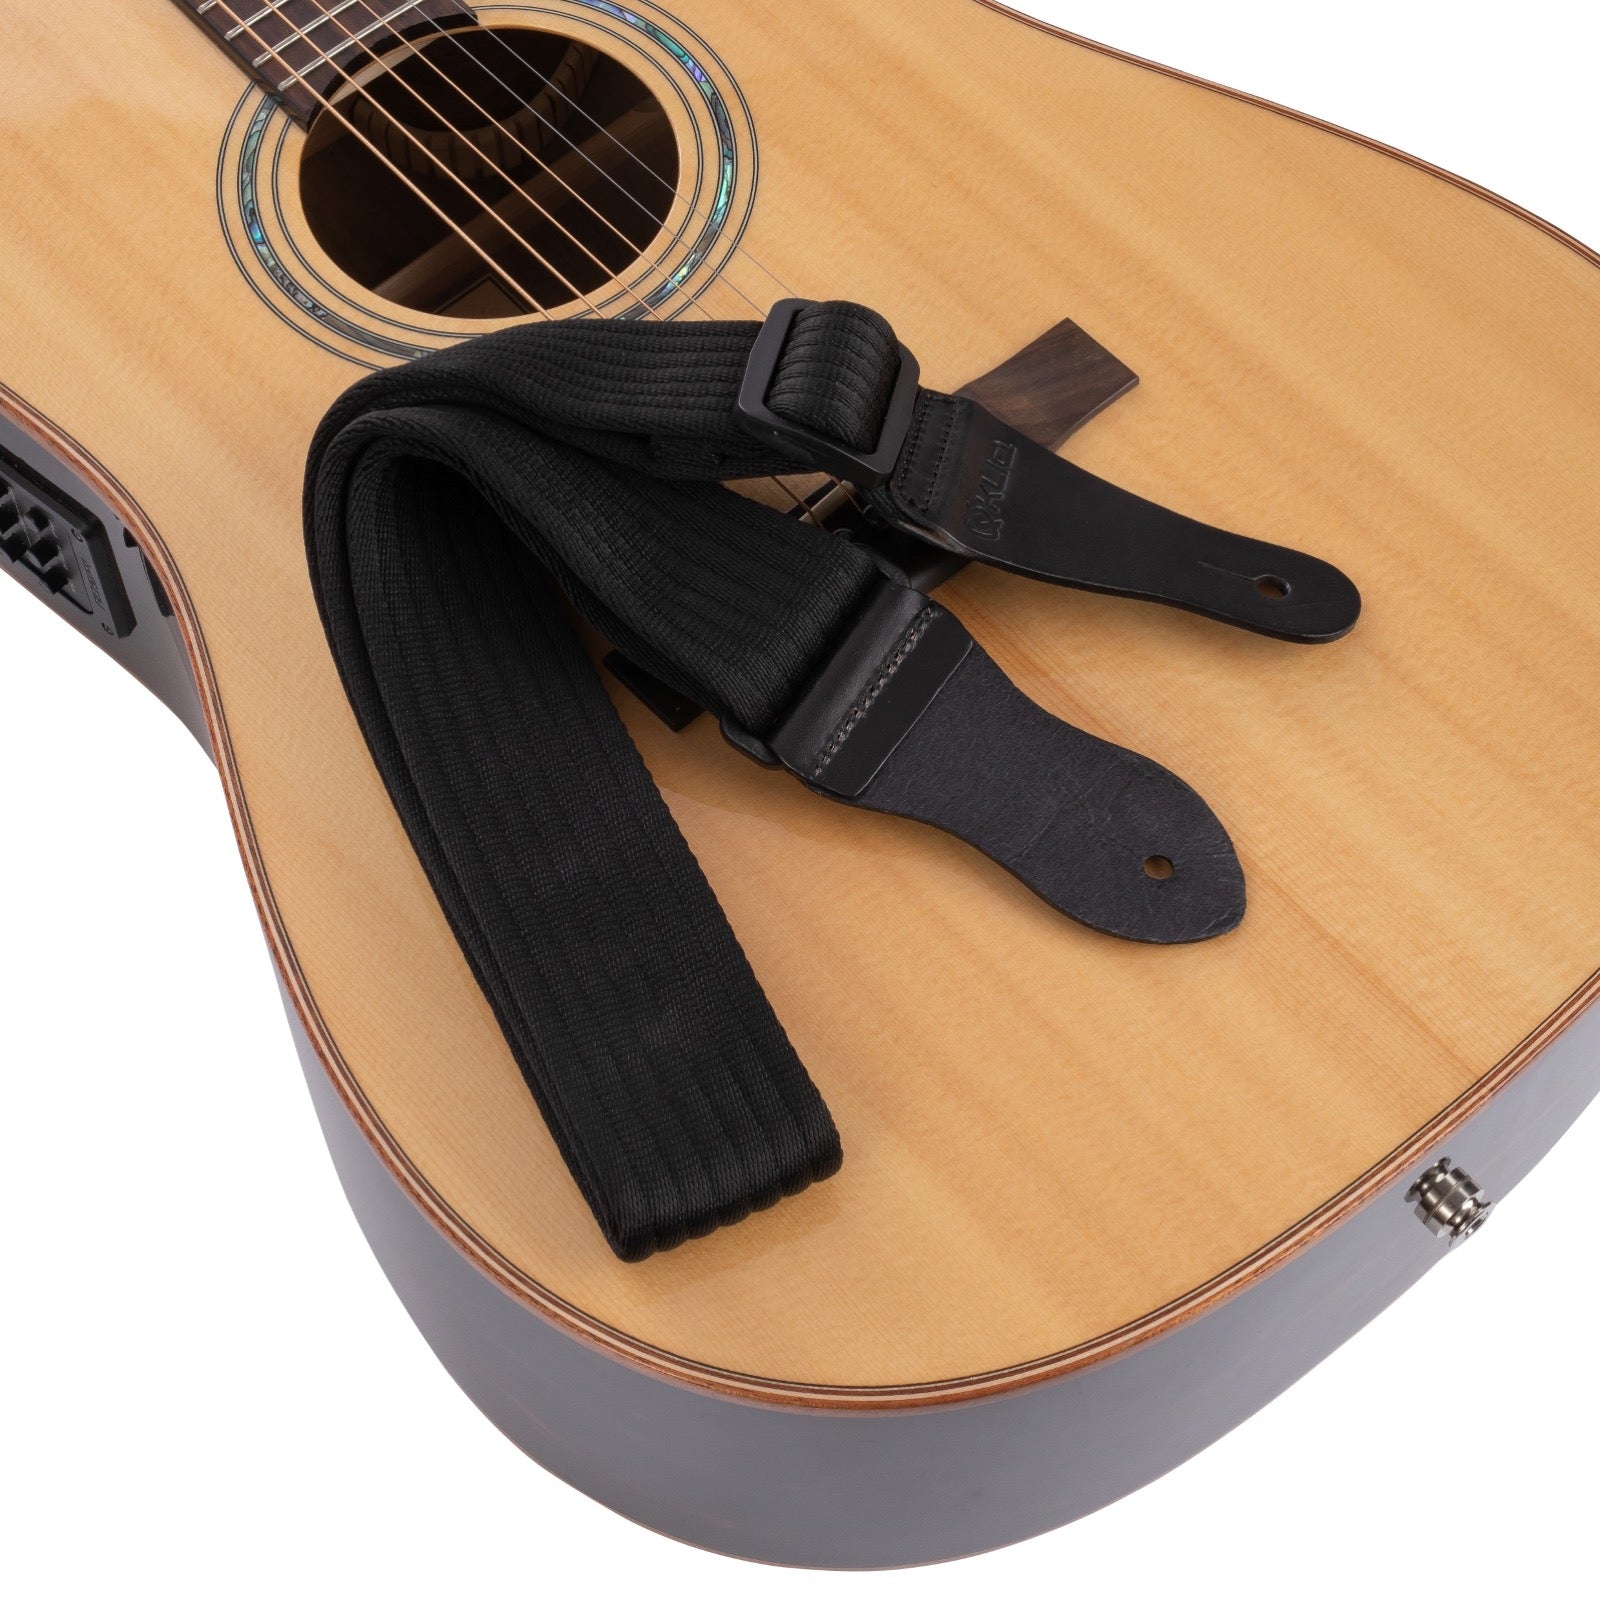 Vintage Woven Guitar Strap for Acoustic and Electric Guitars with